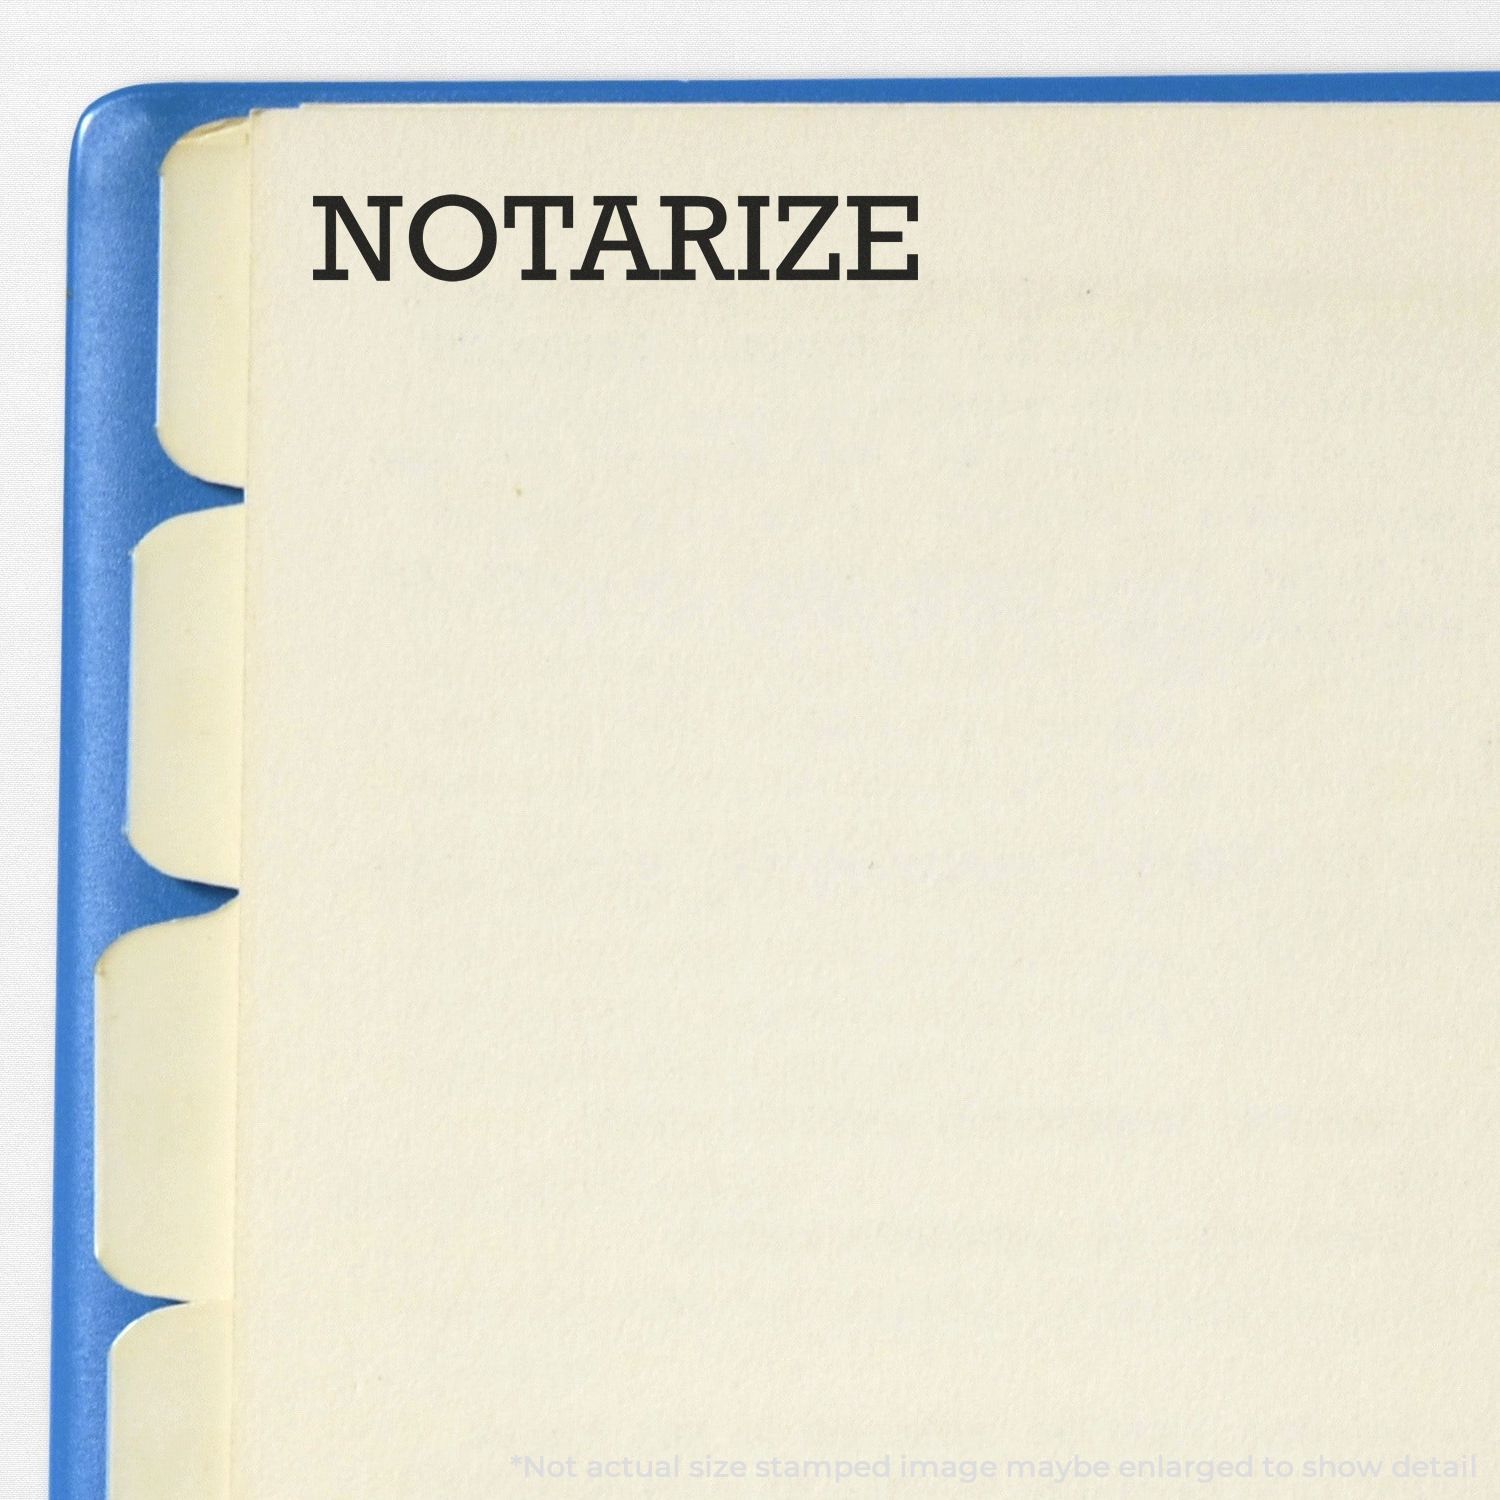 A self-inking stamp with a stamped image showing how the text "NOTARIZE" is displayed after stamping.